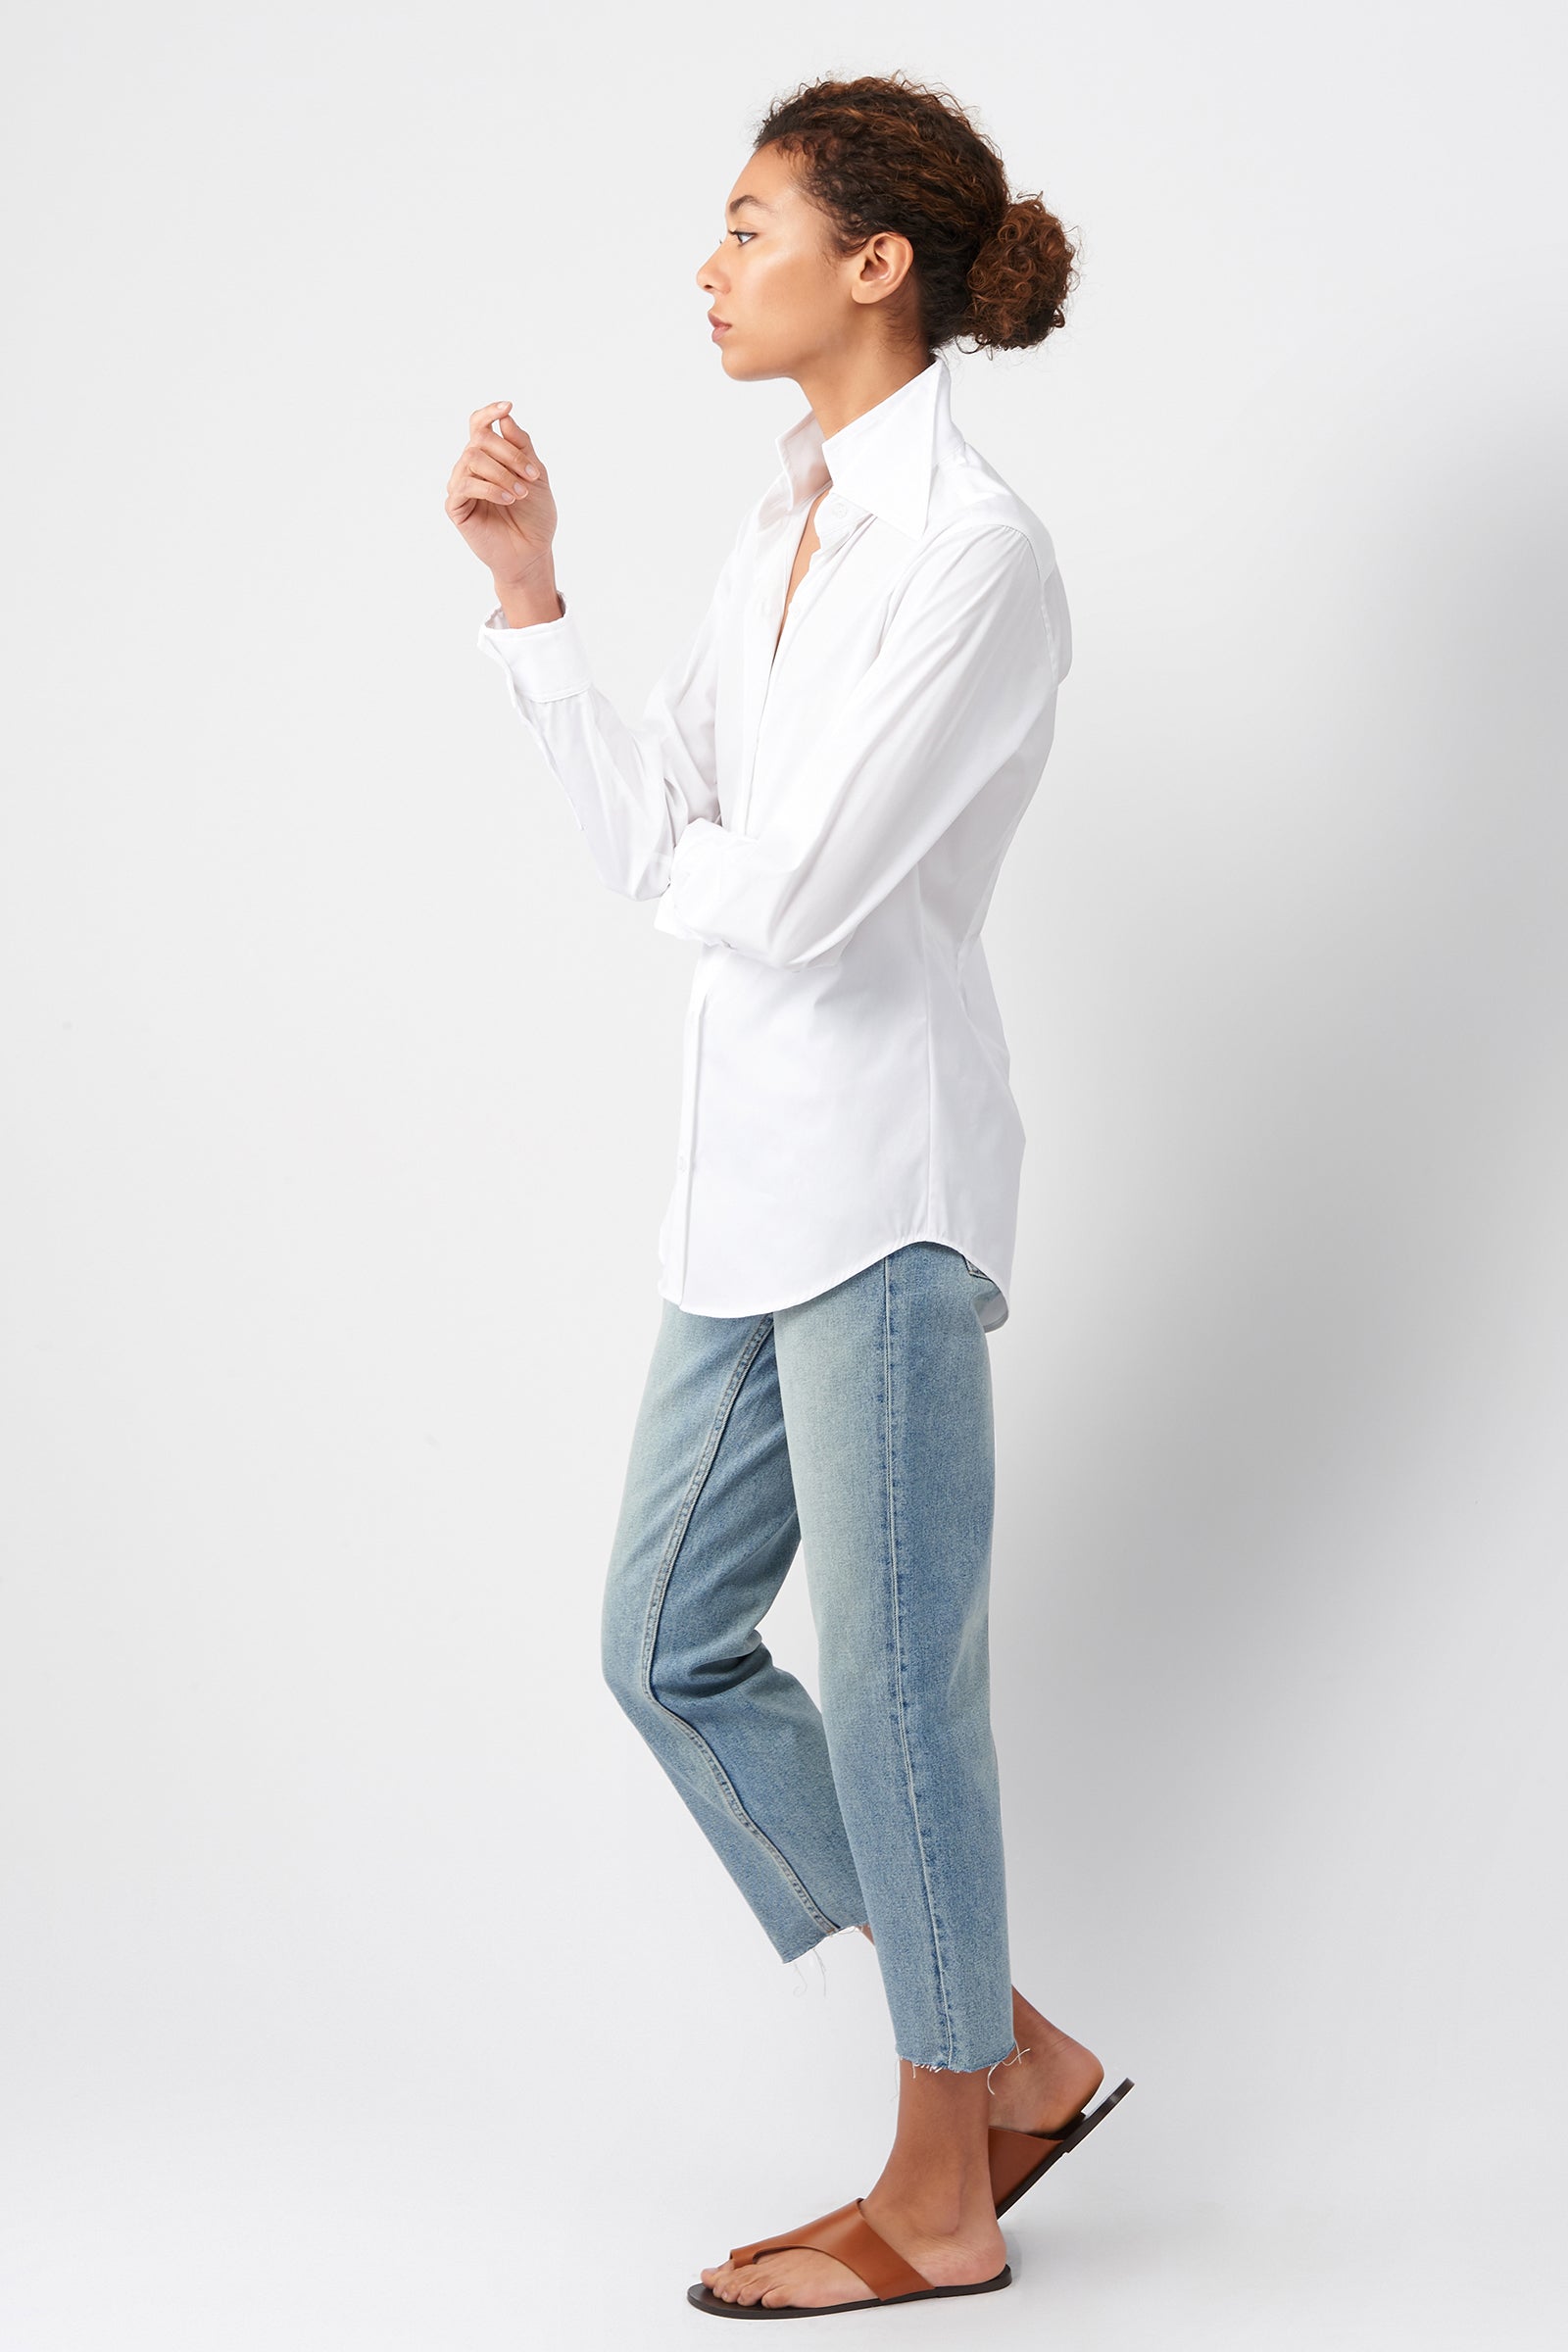 Kal Rieman Double Collar Shirt in White Cotton on Model Side View